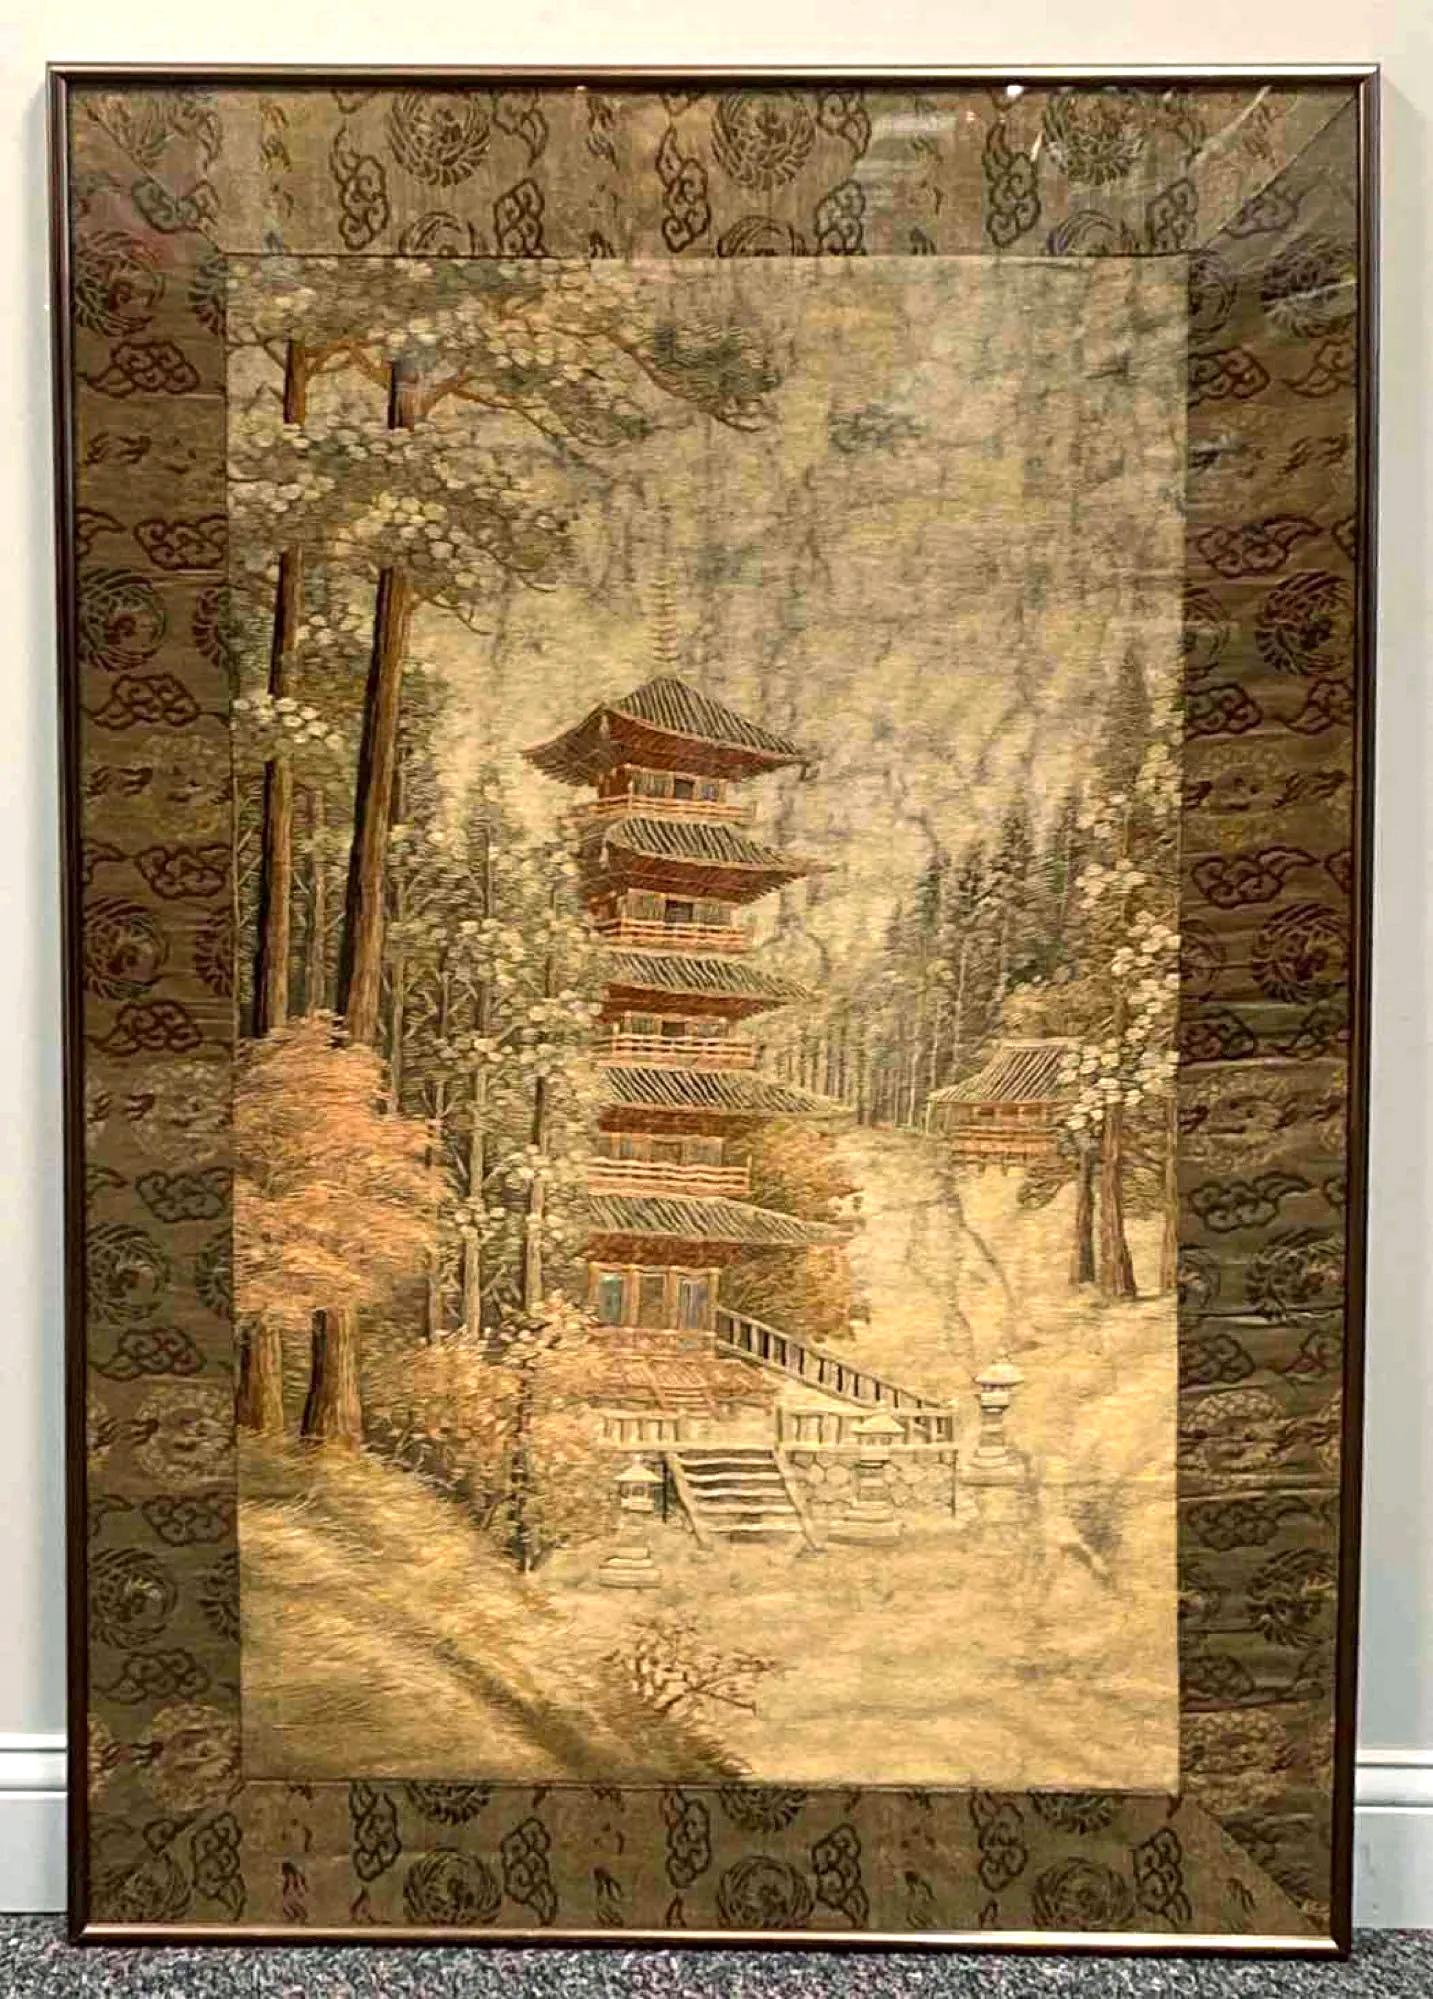 Framed Japanese Embroidery Textile Panel Pagoda Scenery For Sale 2